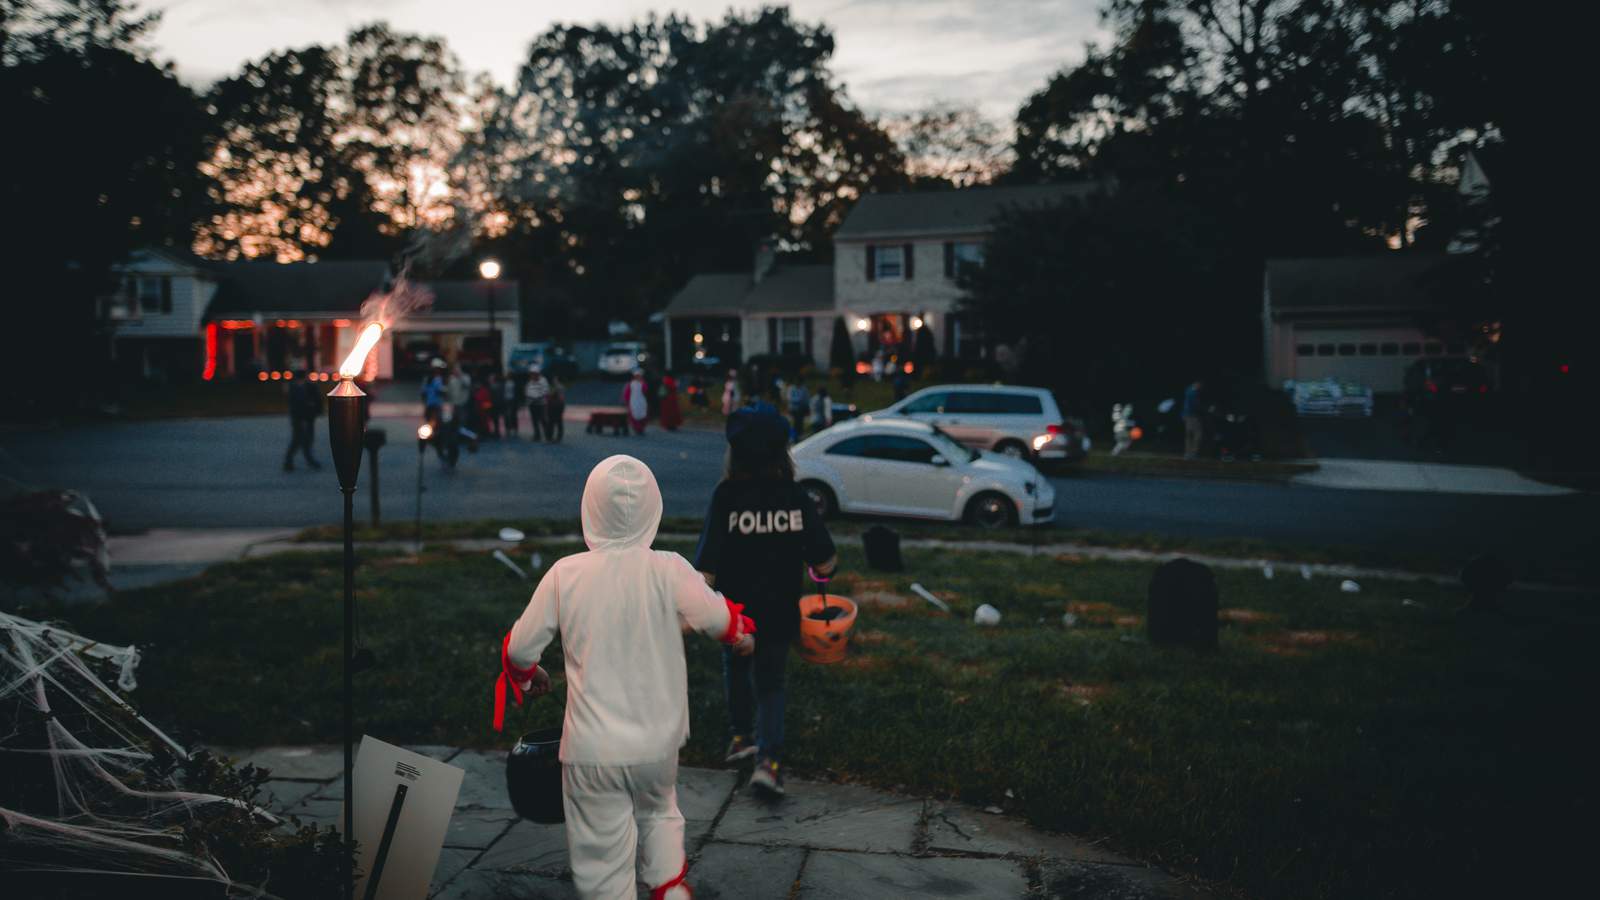 5 safety guidelines you should know for Halloween